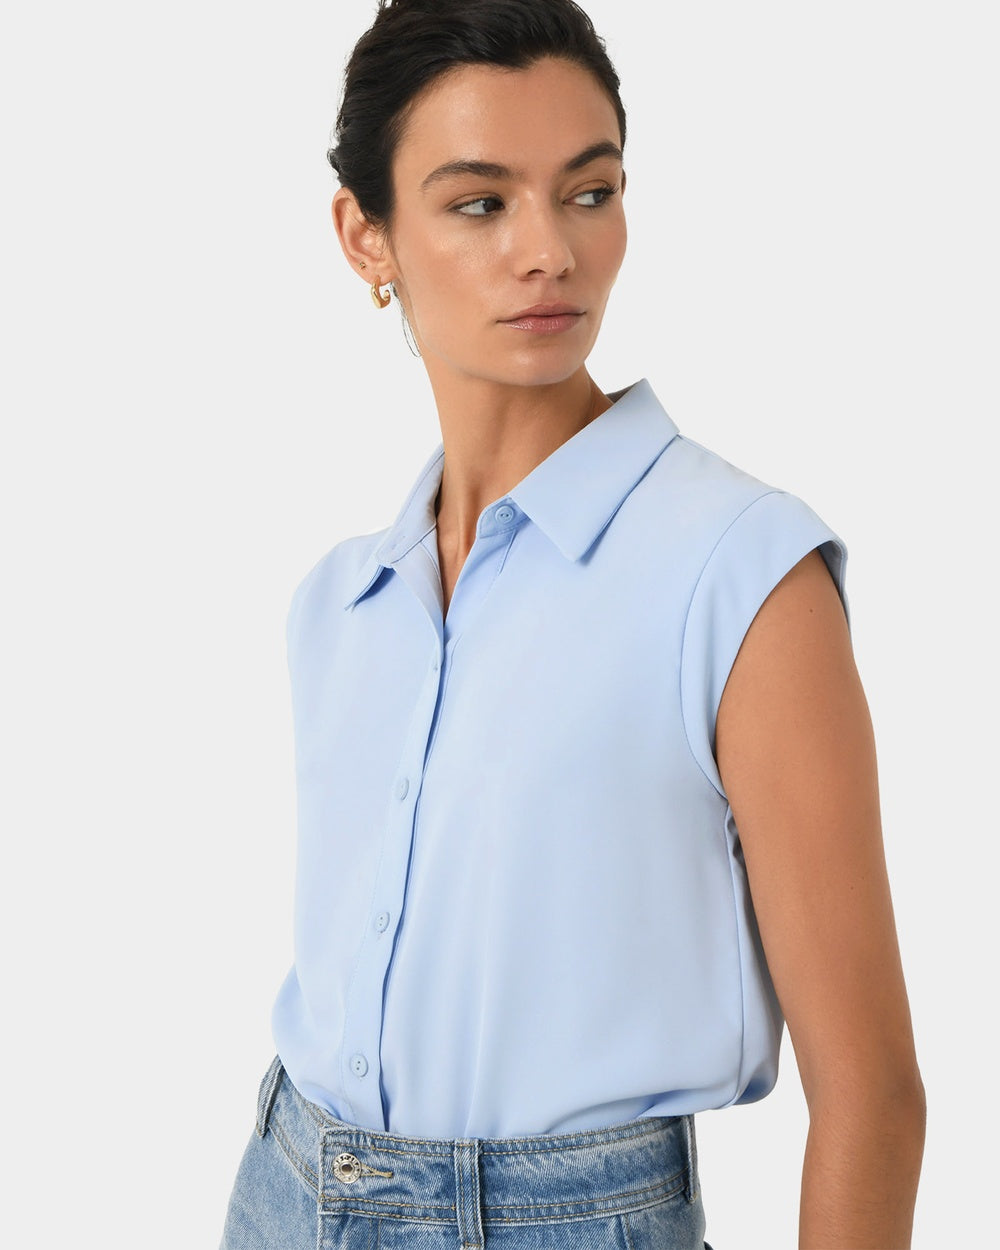 Cap Sleeve Shirt in light blue. Pair with either your new pink skirt or blue pants.